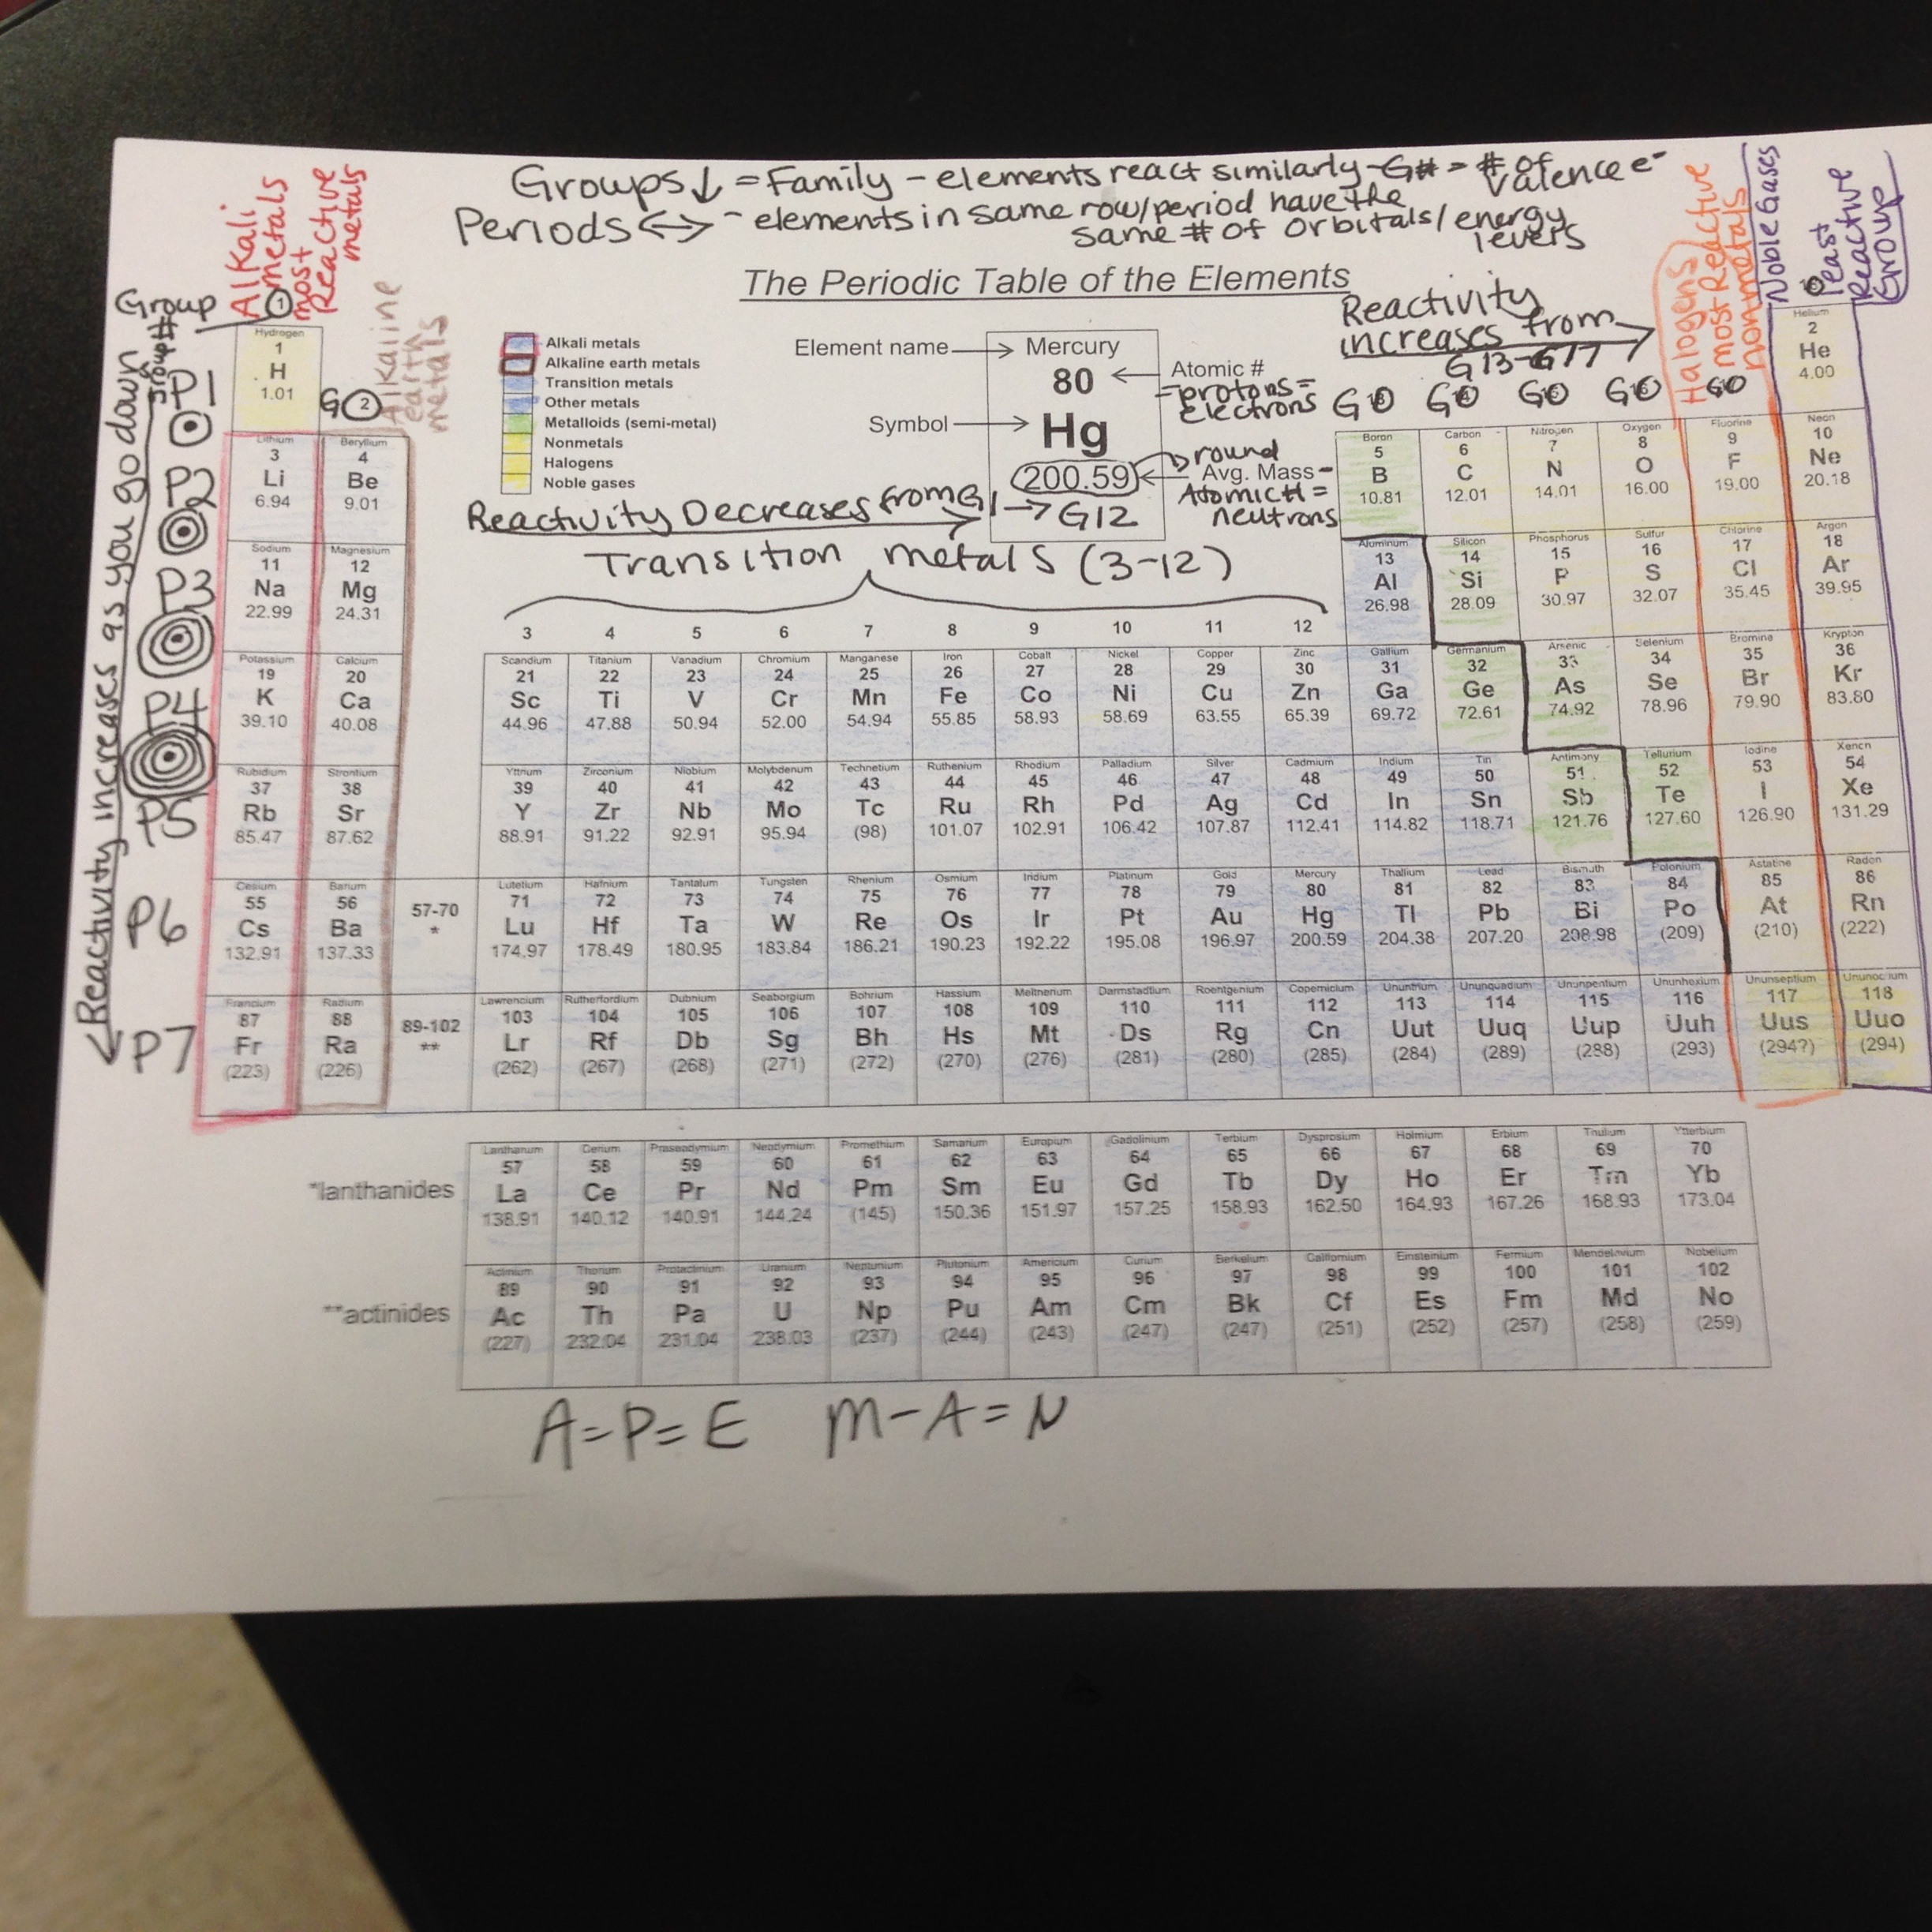 color coding the periodic table answers